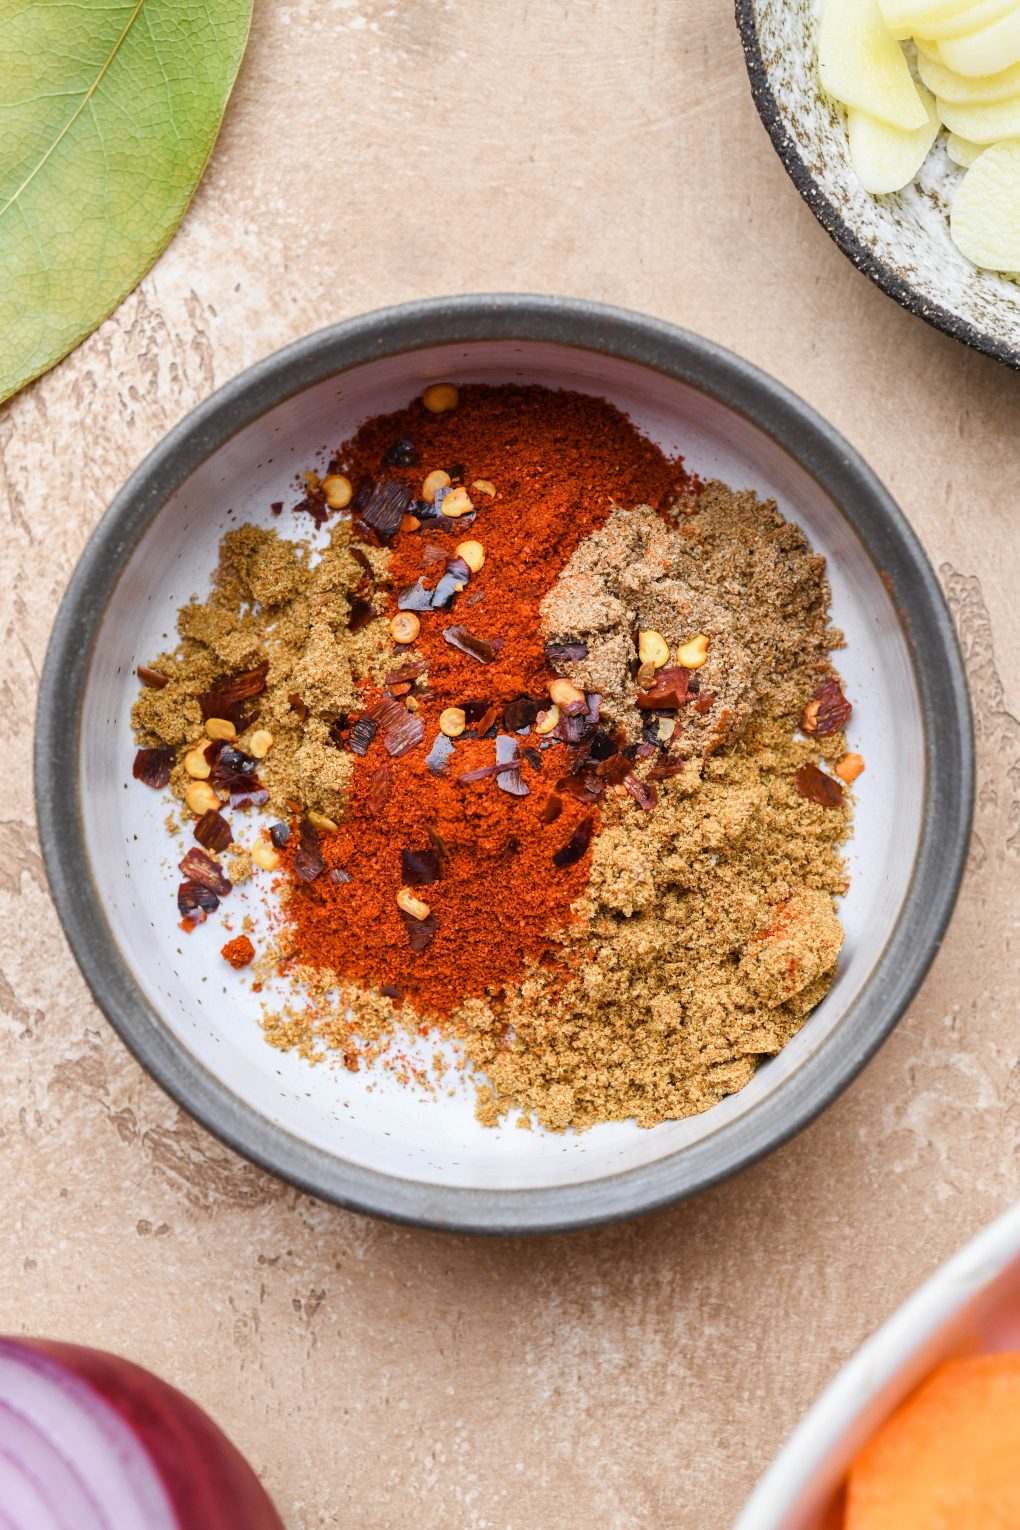 Close up image of a small dish filled with spices for carrot soup - paprika, cumin, coriander, and chili flakes.